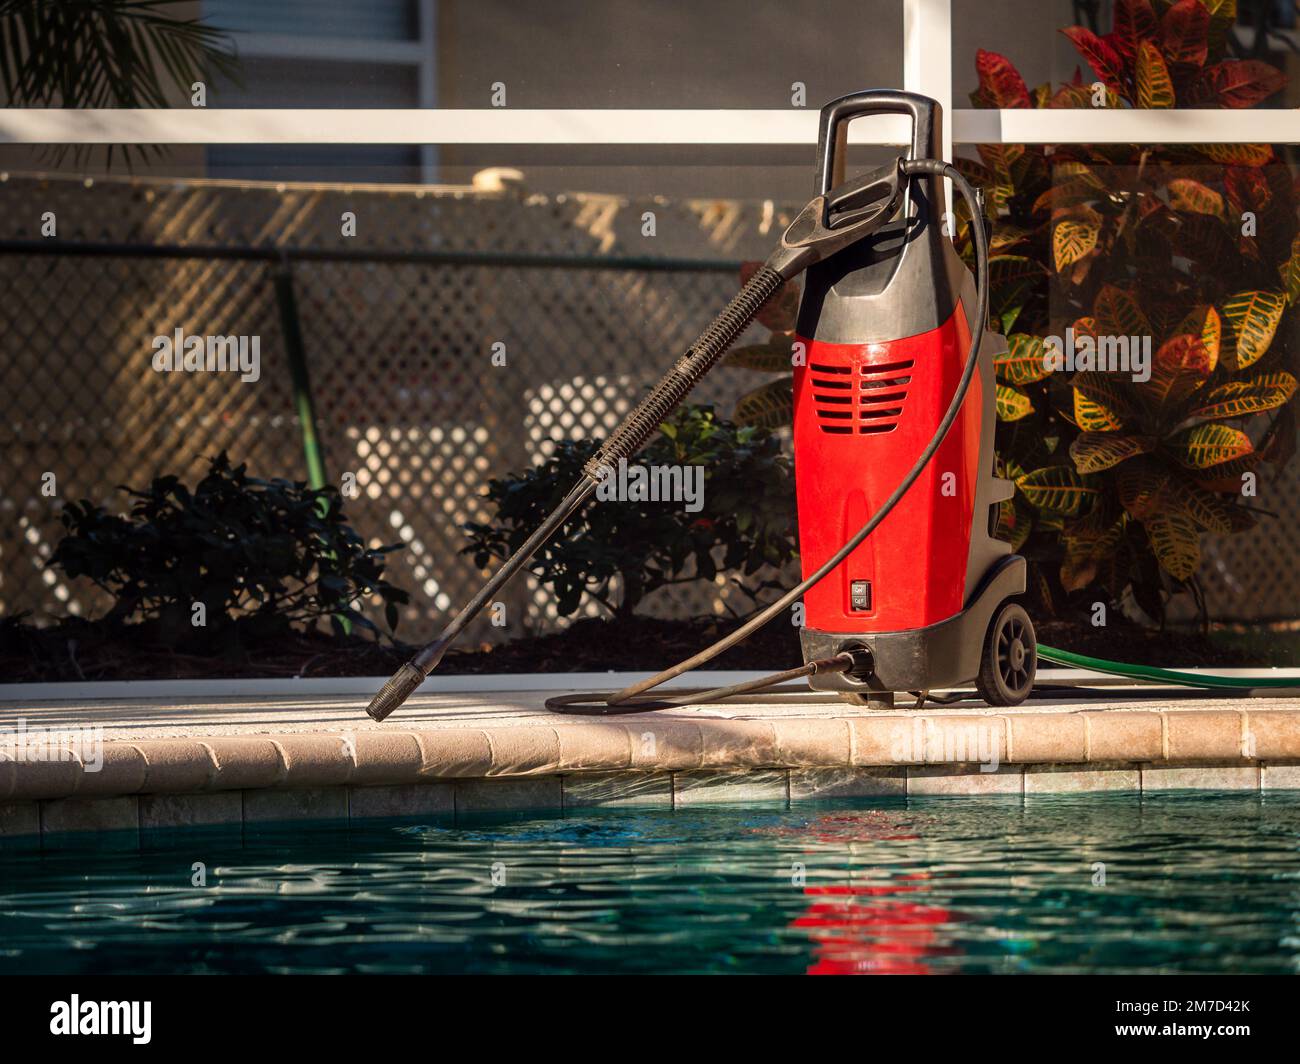 Electric powered pressure washer on swimming pool deck. Power wash cleaning service equipment. Stock Photo